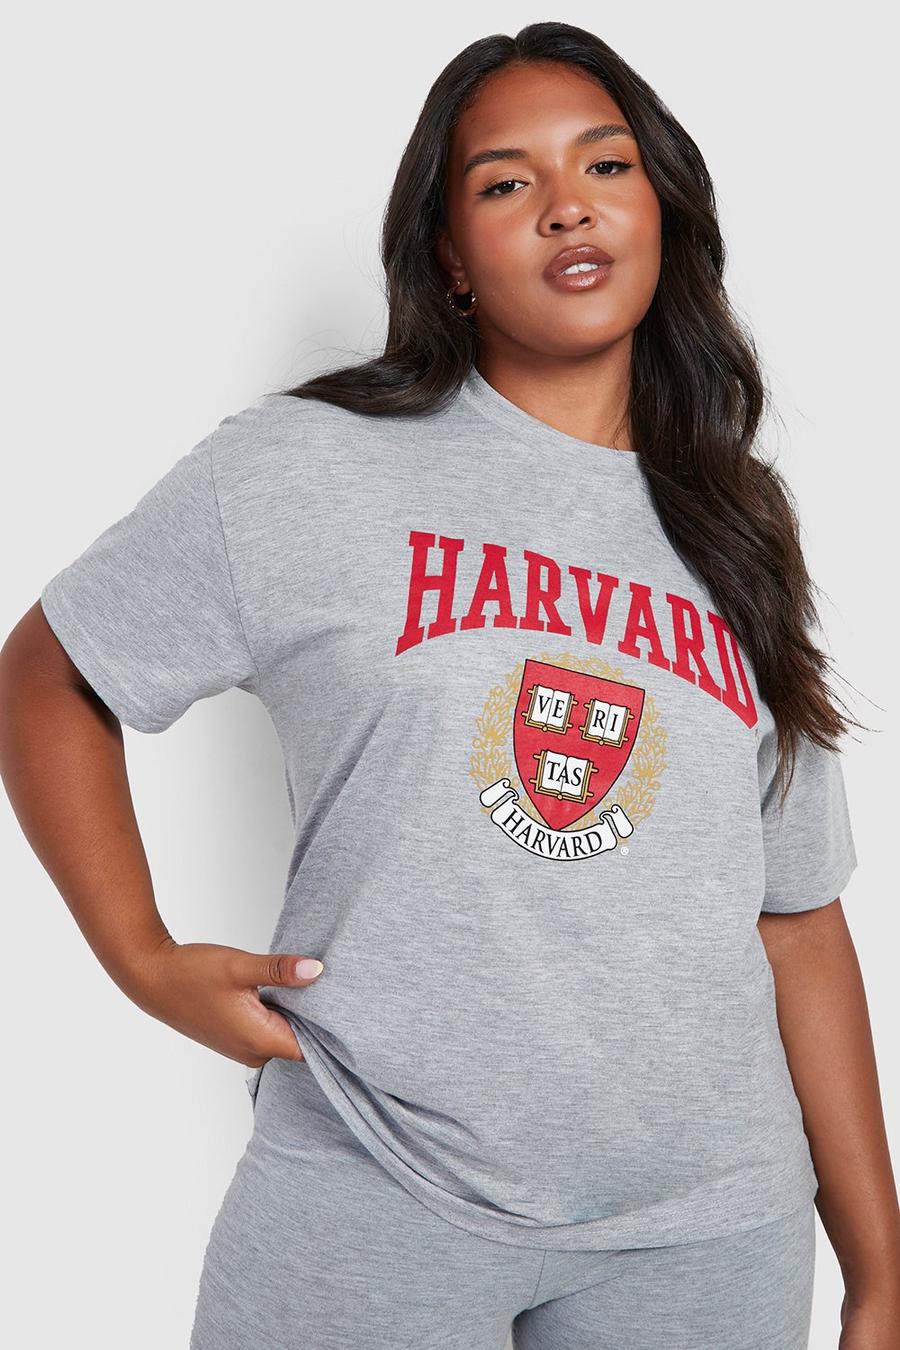 T-shirt Plus Size ufficiale Harvard, Grey image number 1